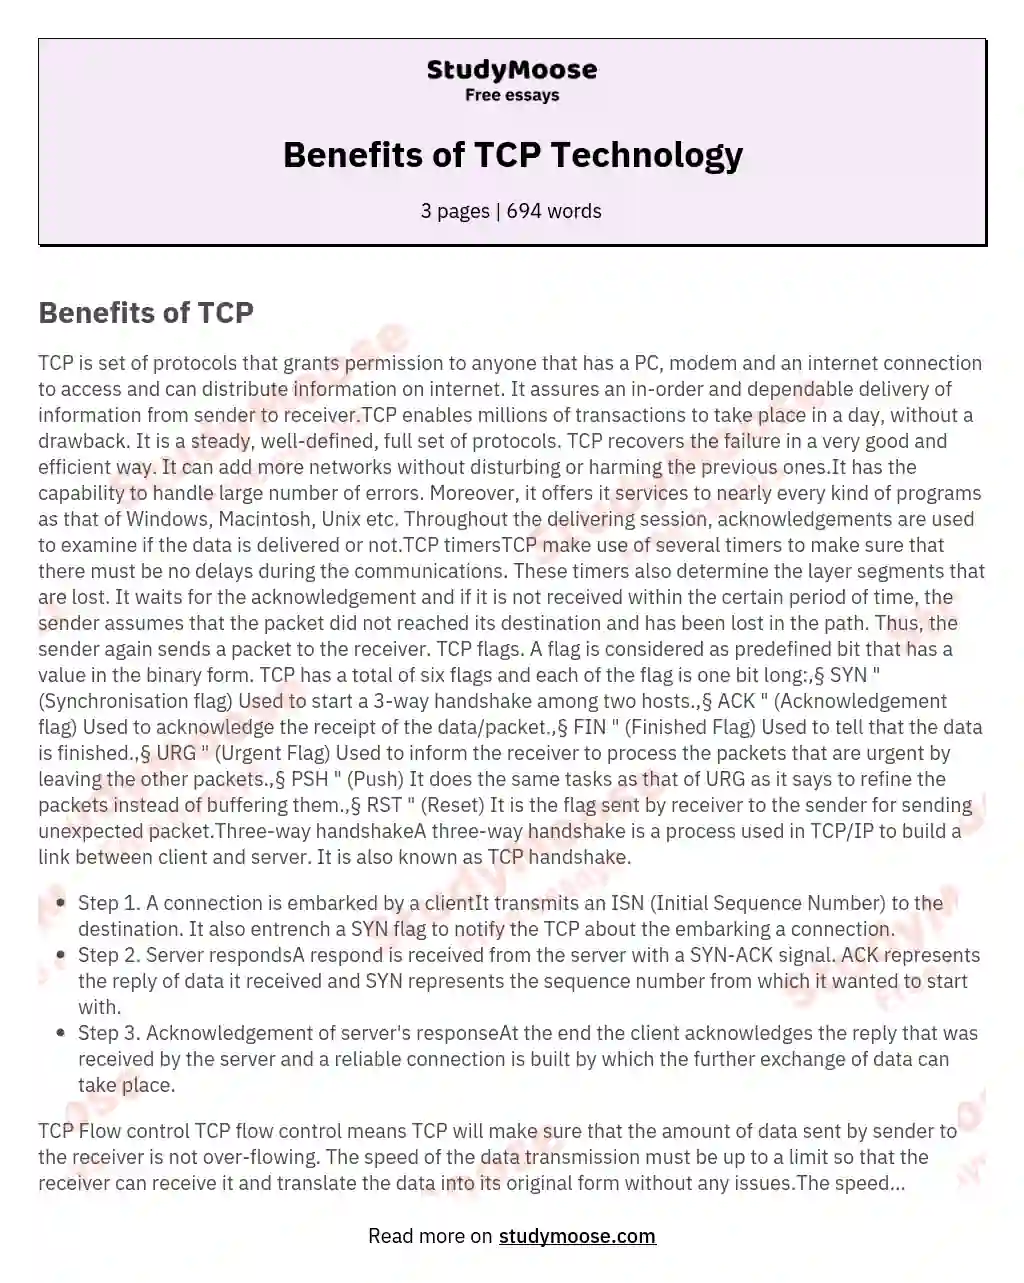 Benefits of TCP Technology essay